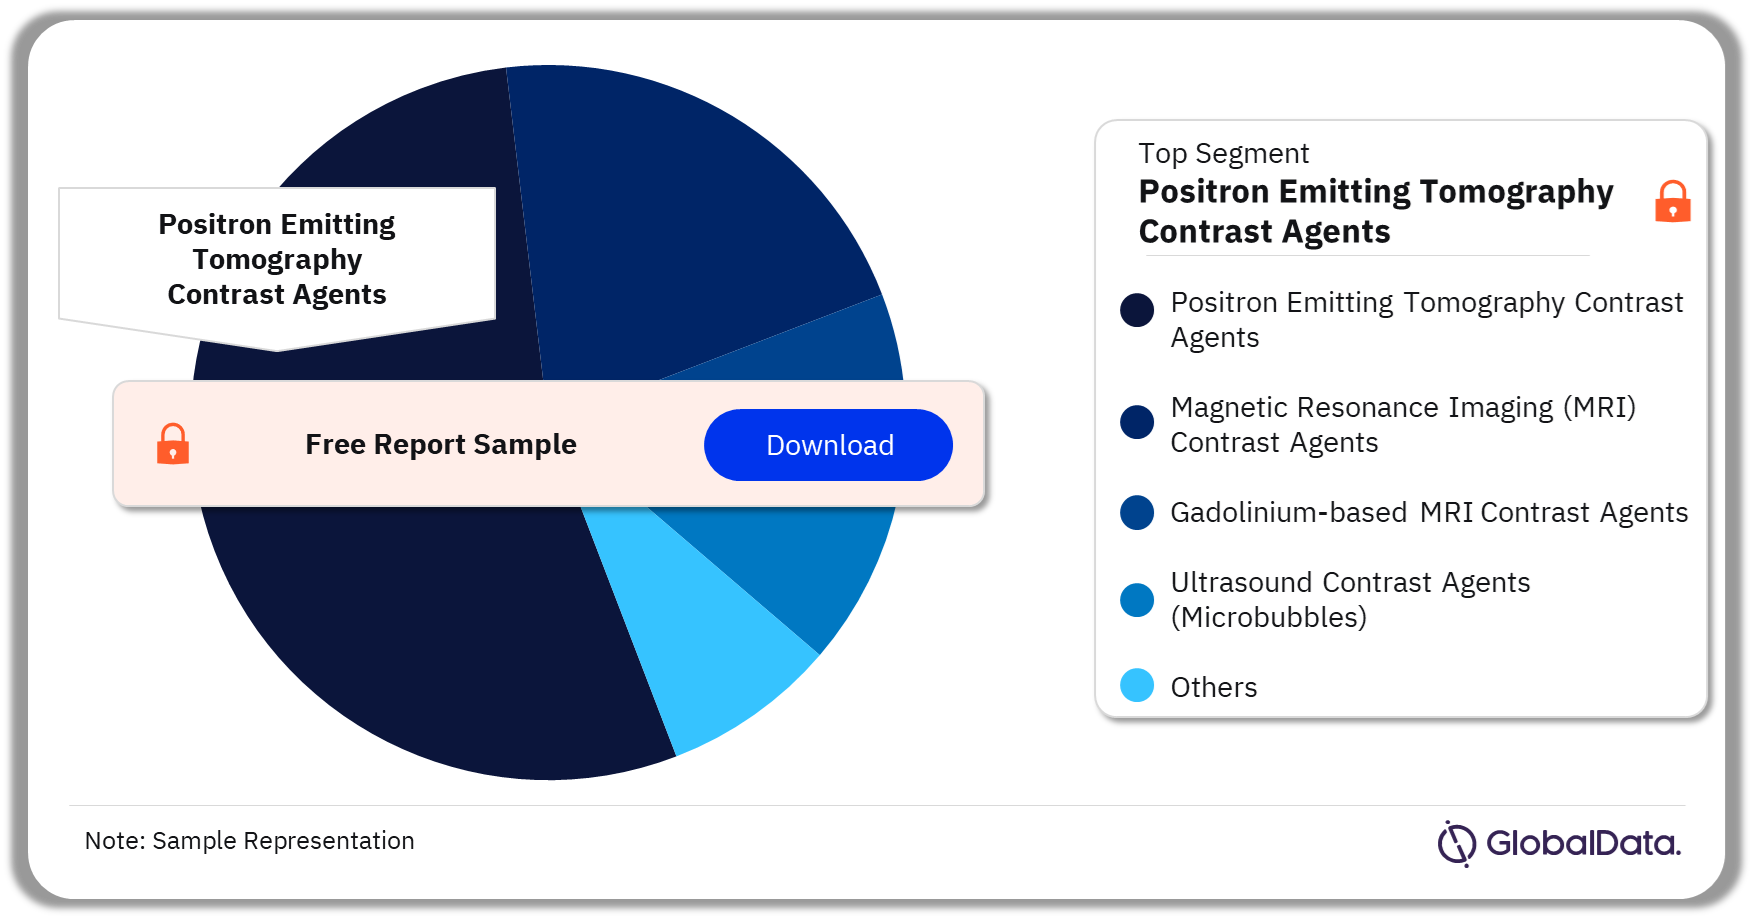 Contrast Agents Pipeline Market Analysis by Segments, 2023 (%)